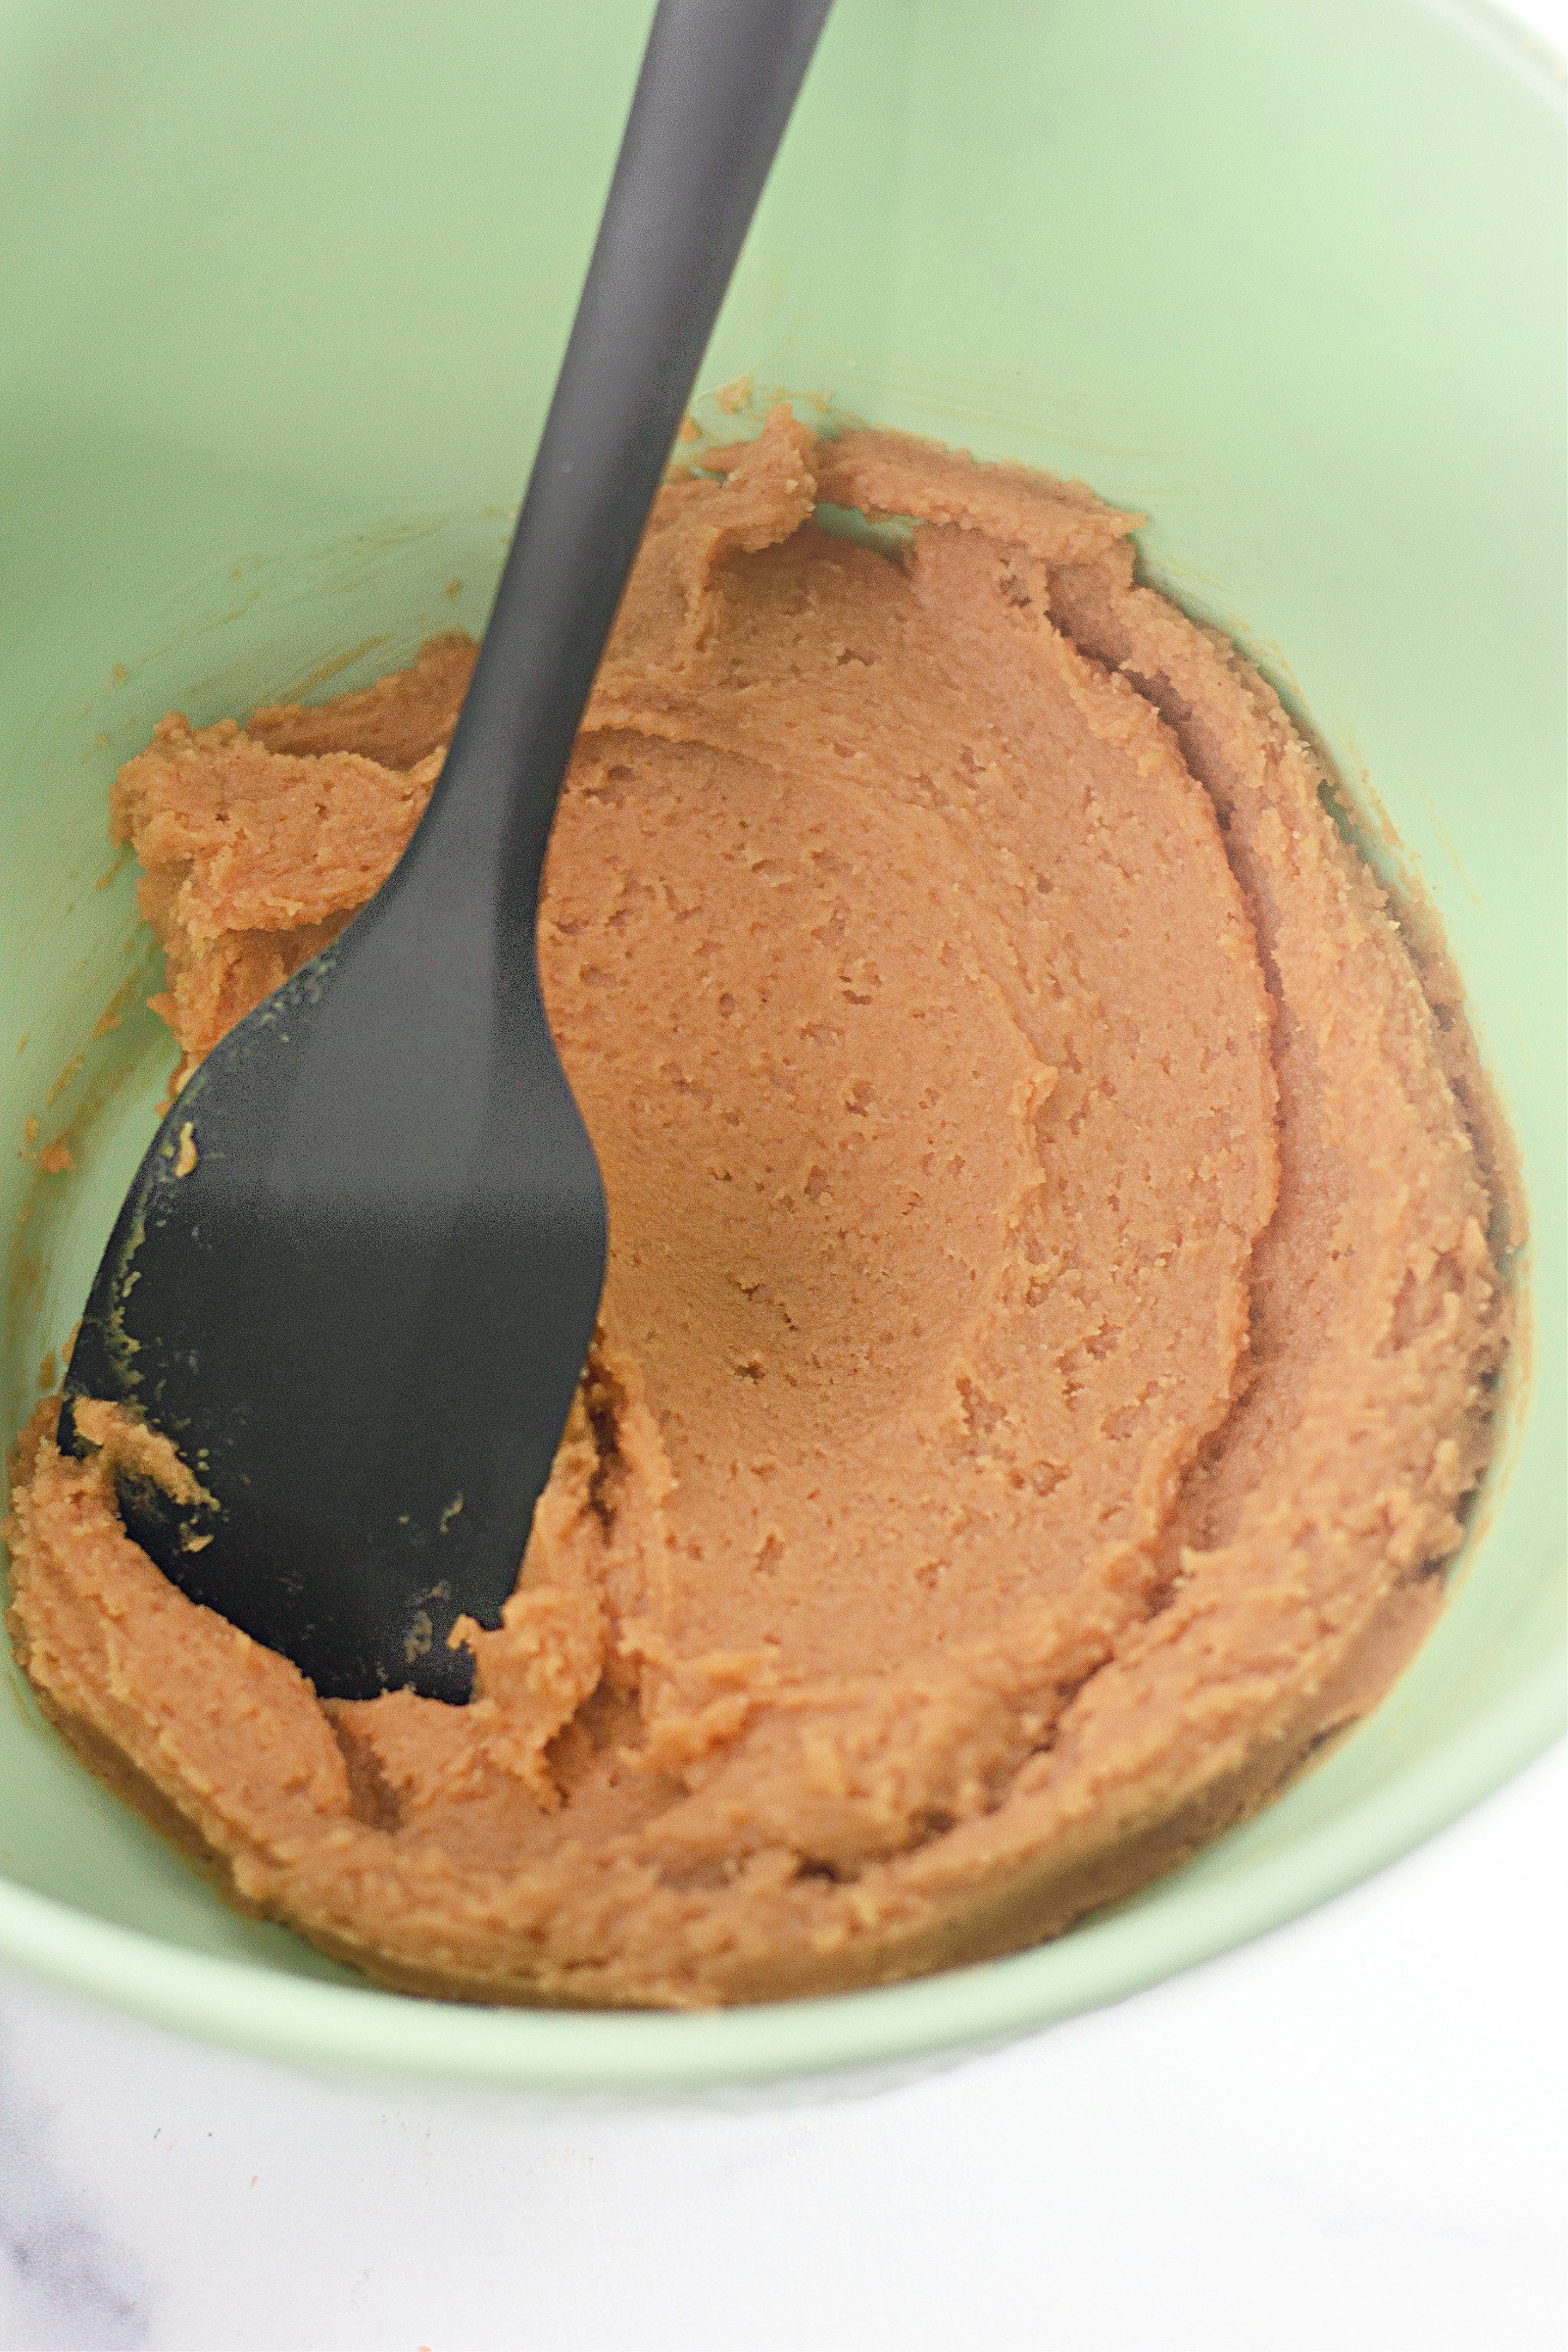 Raw peanut butter cookie batter in a green bowl with a large black spoon.